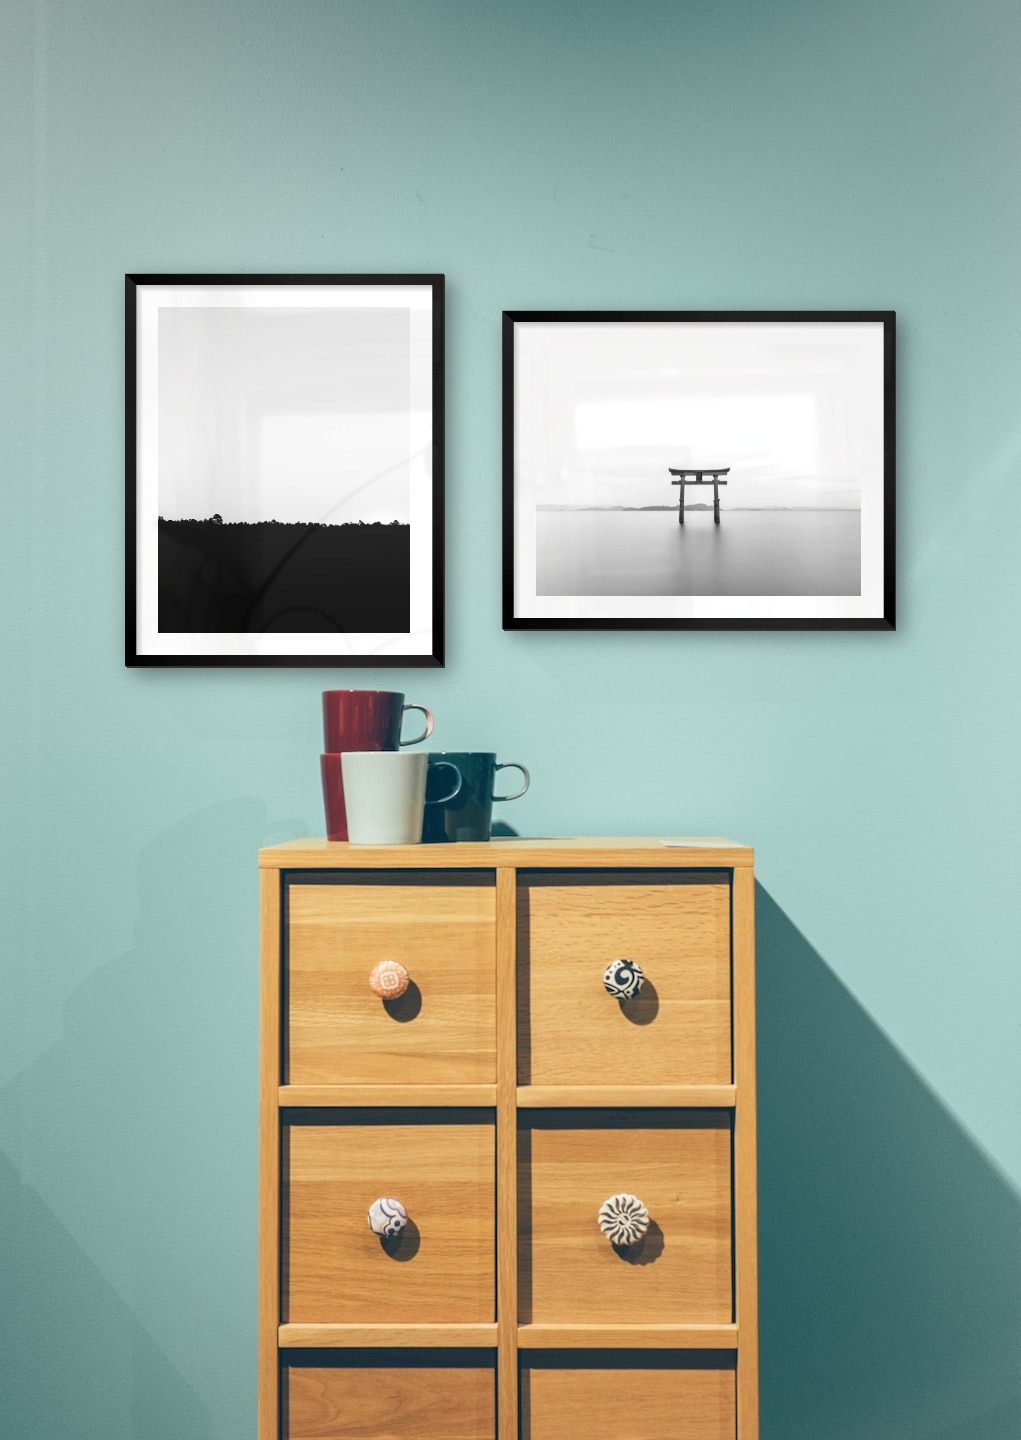 Gallery wall with picture frames in black in sizes 40x50 with prints "Sky above trees" and "Pillars in the water"